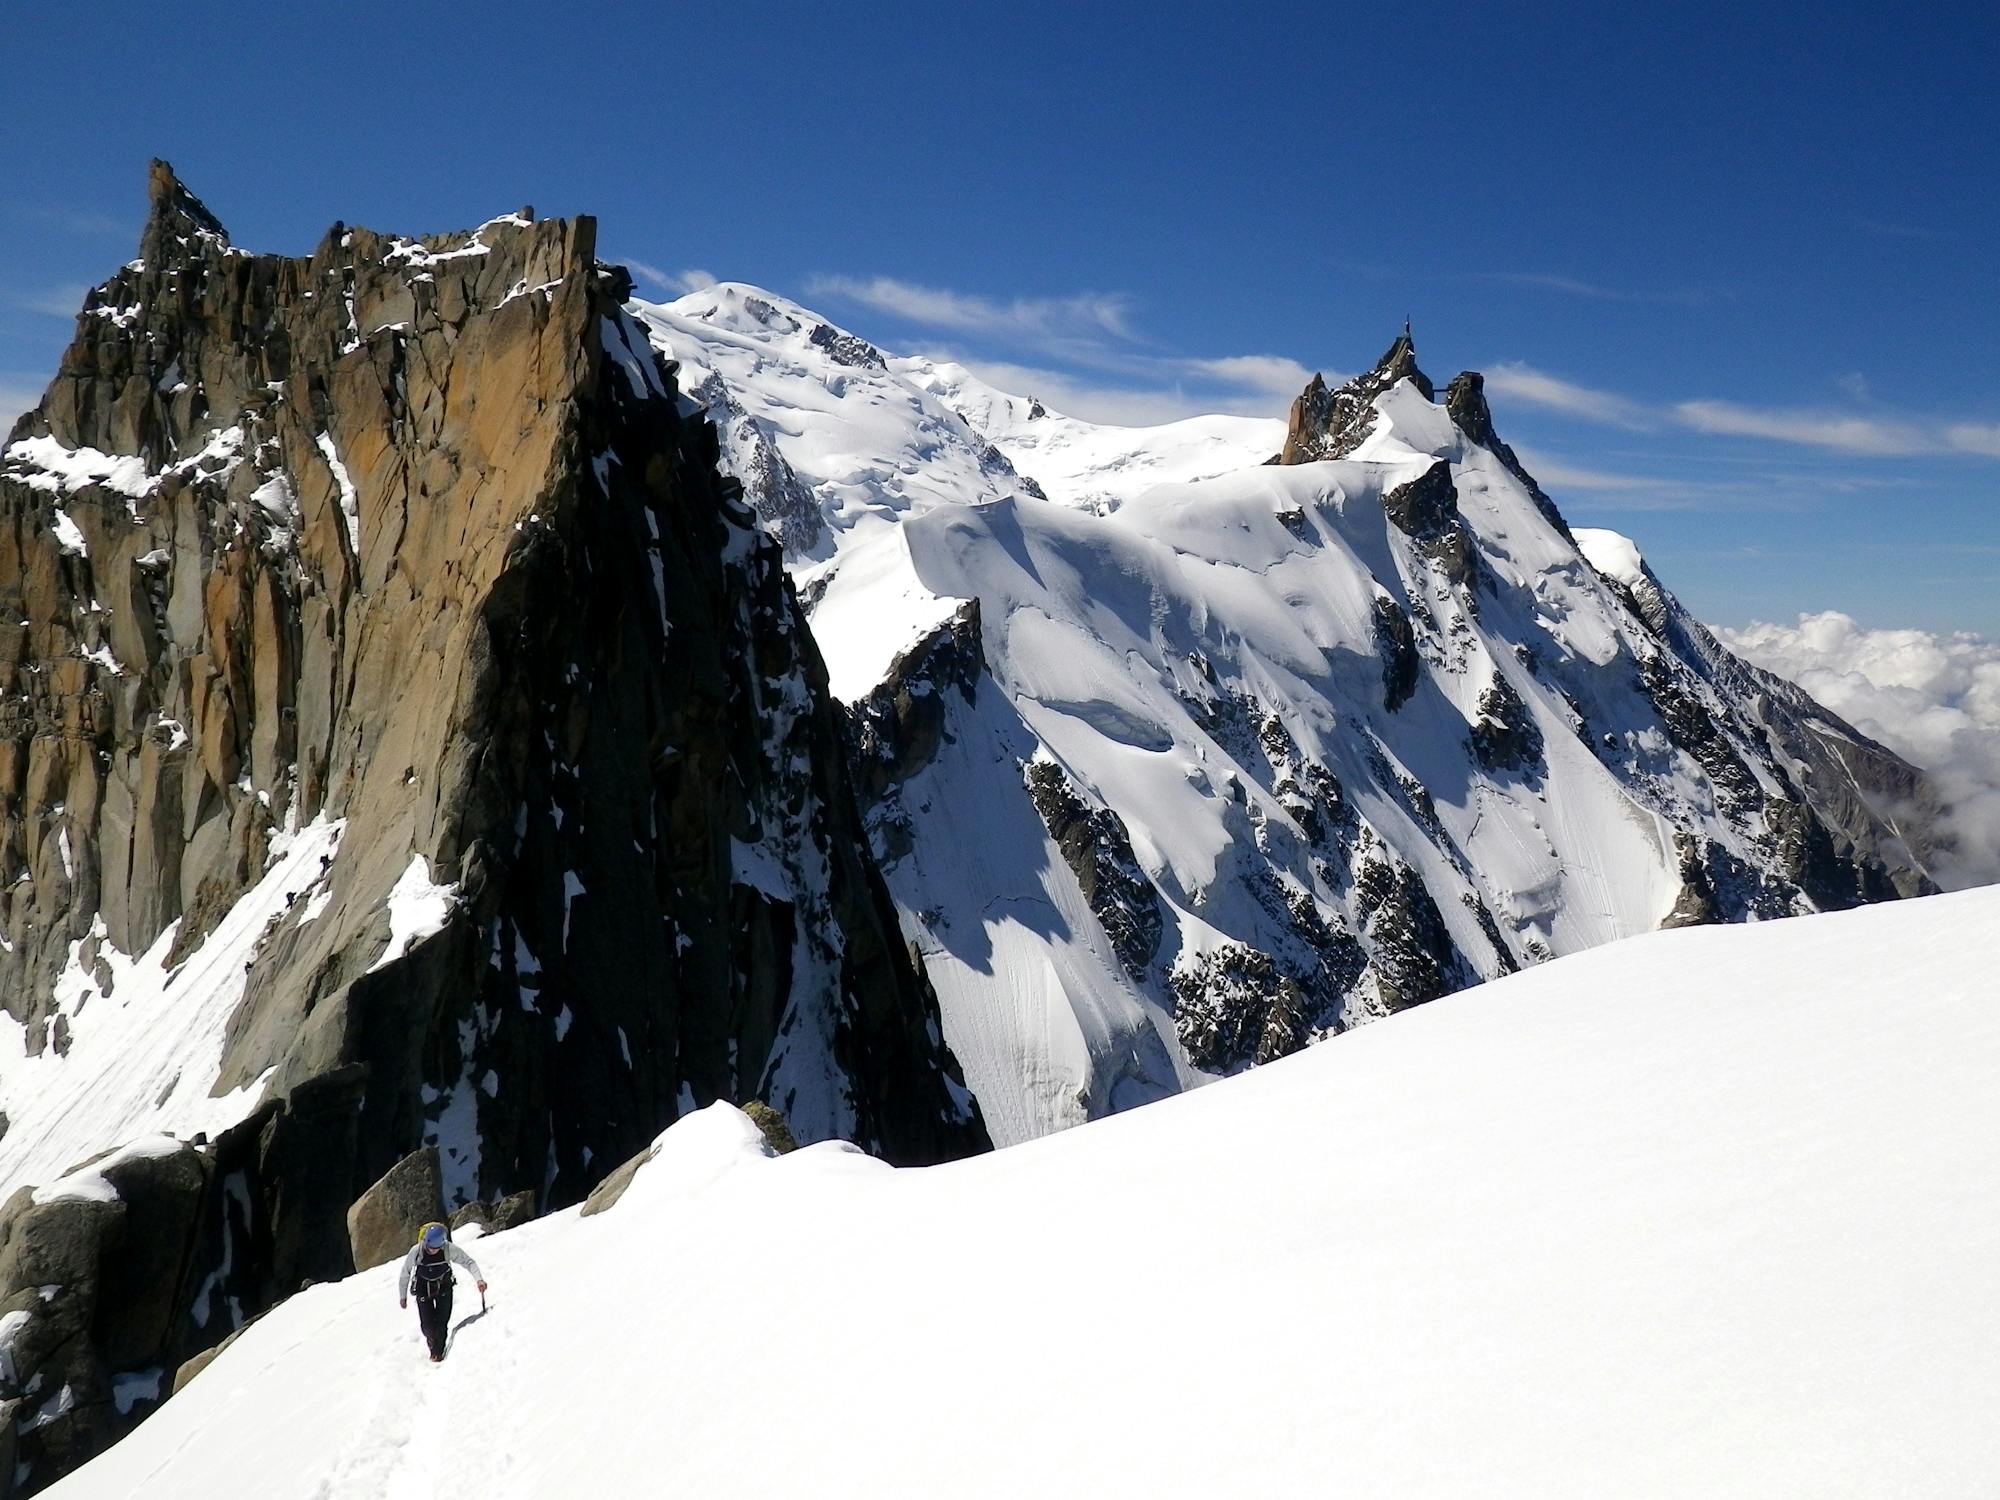 Climbing the final slope to the Aiguille du Plan summit tower.